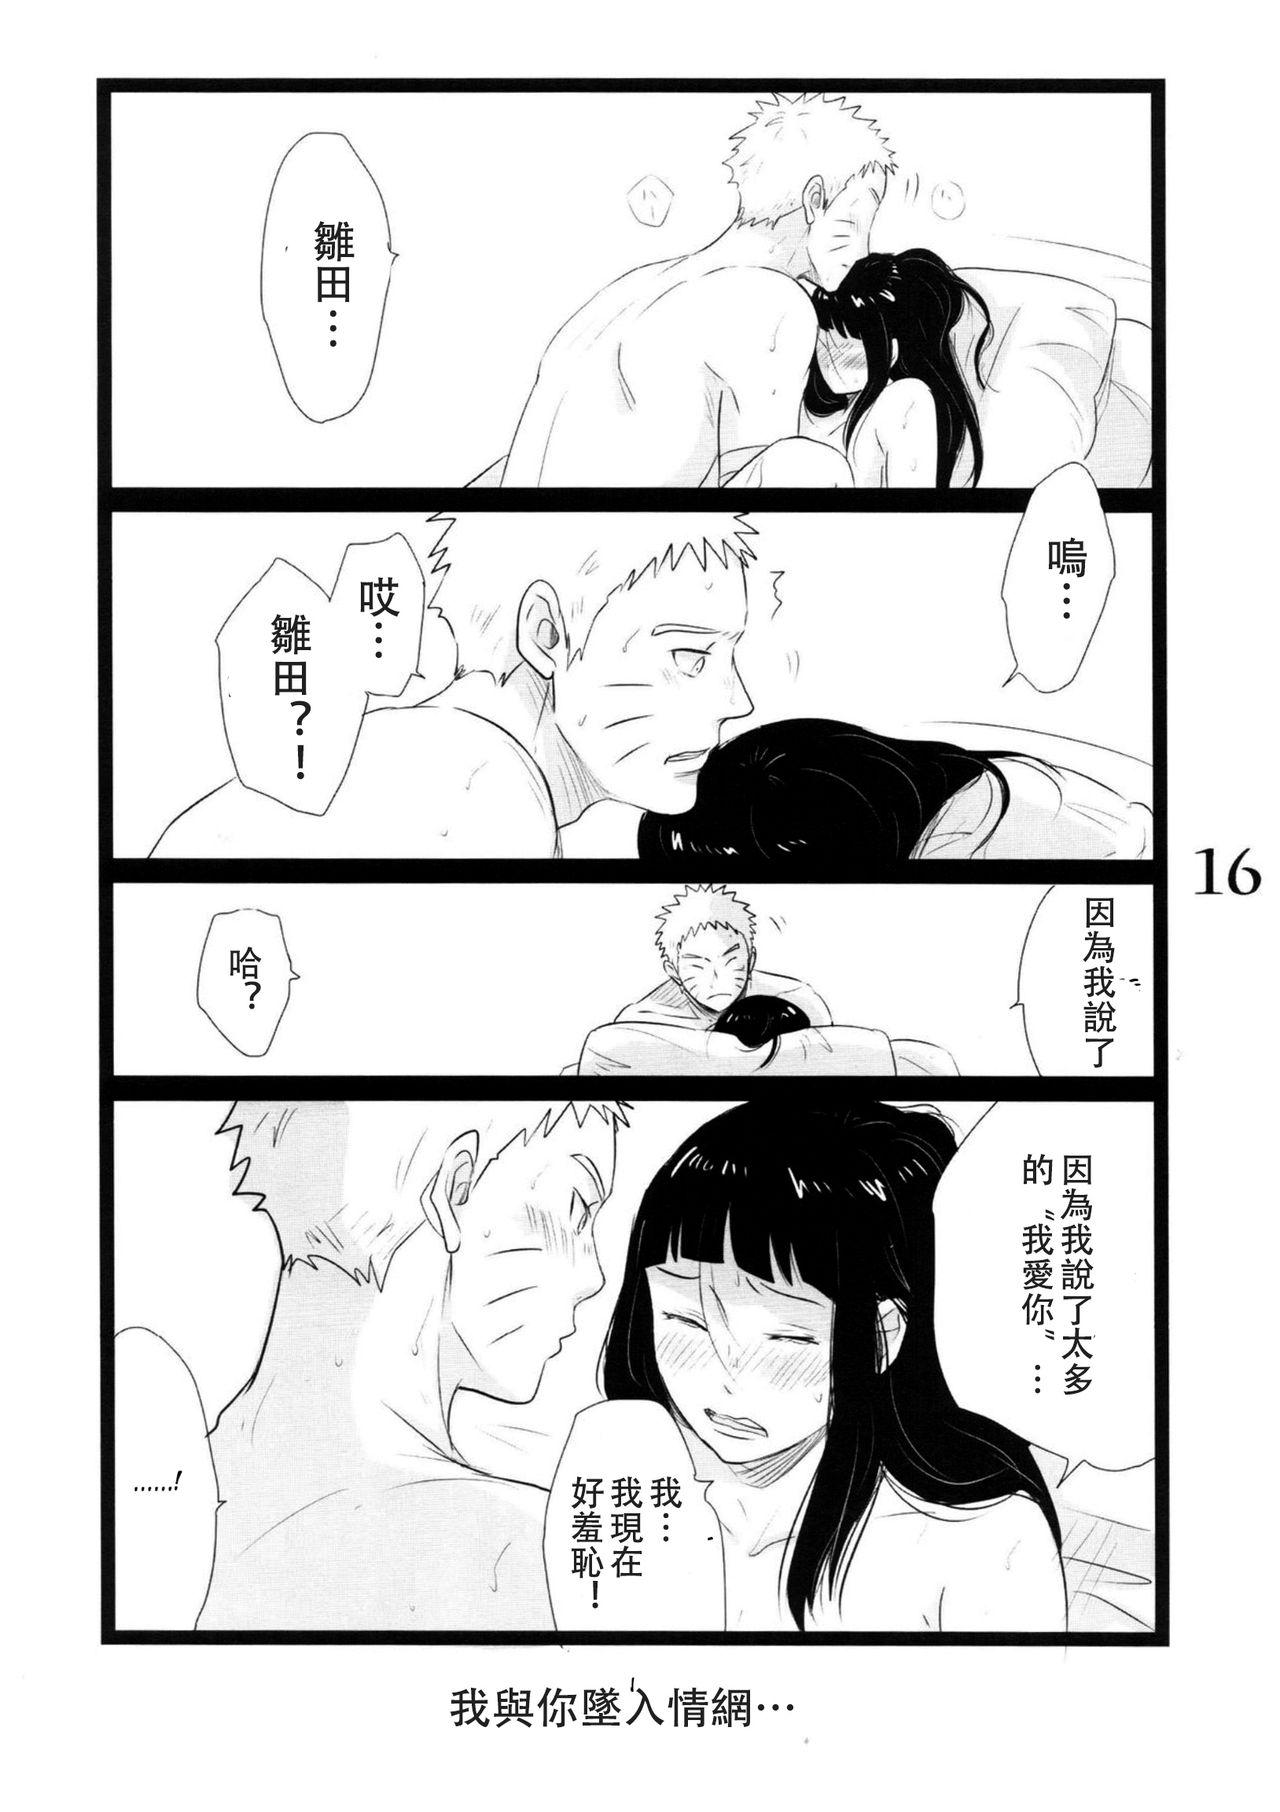 (C88) [blink (shimoyake)] YOUR MY SWEET - I LOVE YOU DARLING (Naruto) [Chinese] [沒有漢化] page 17 full